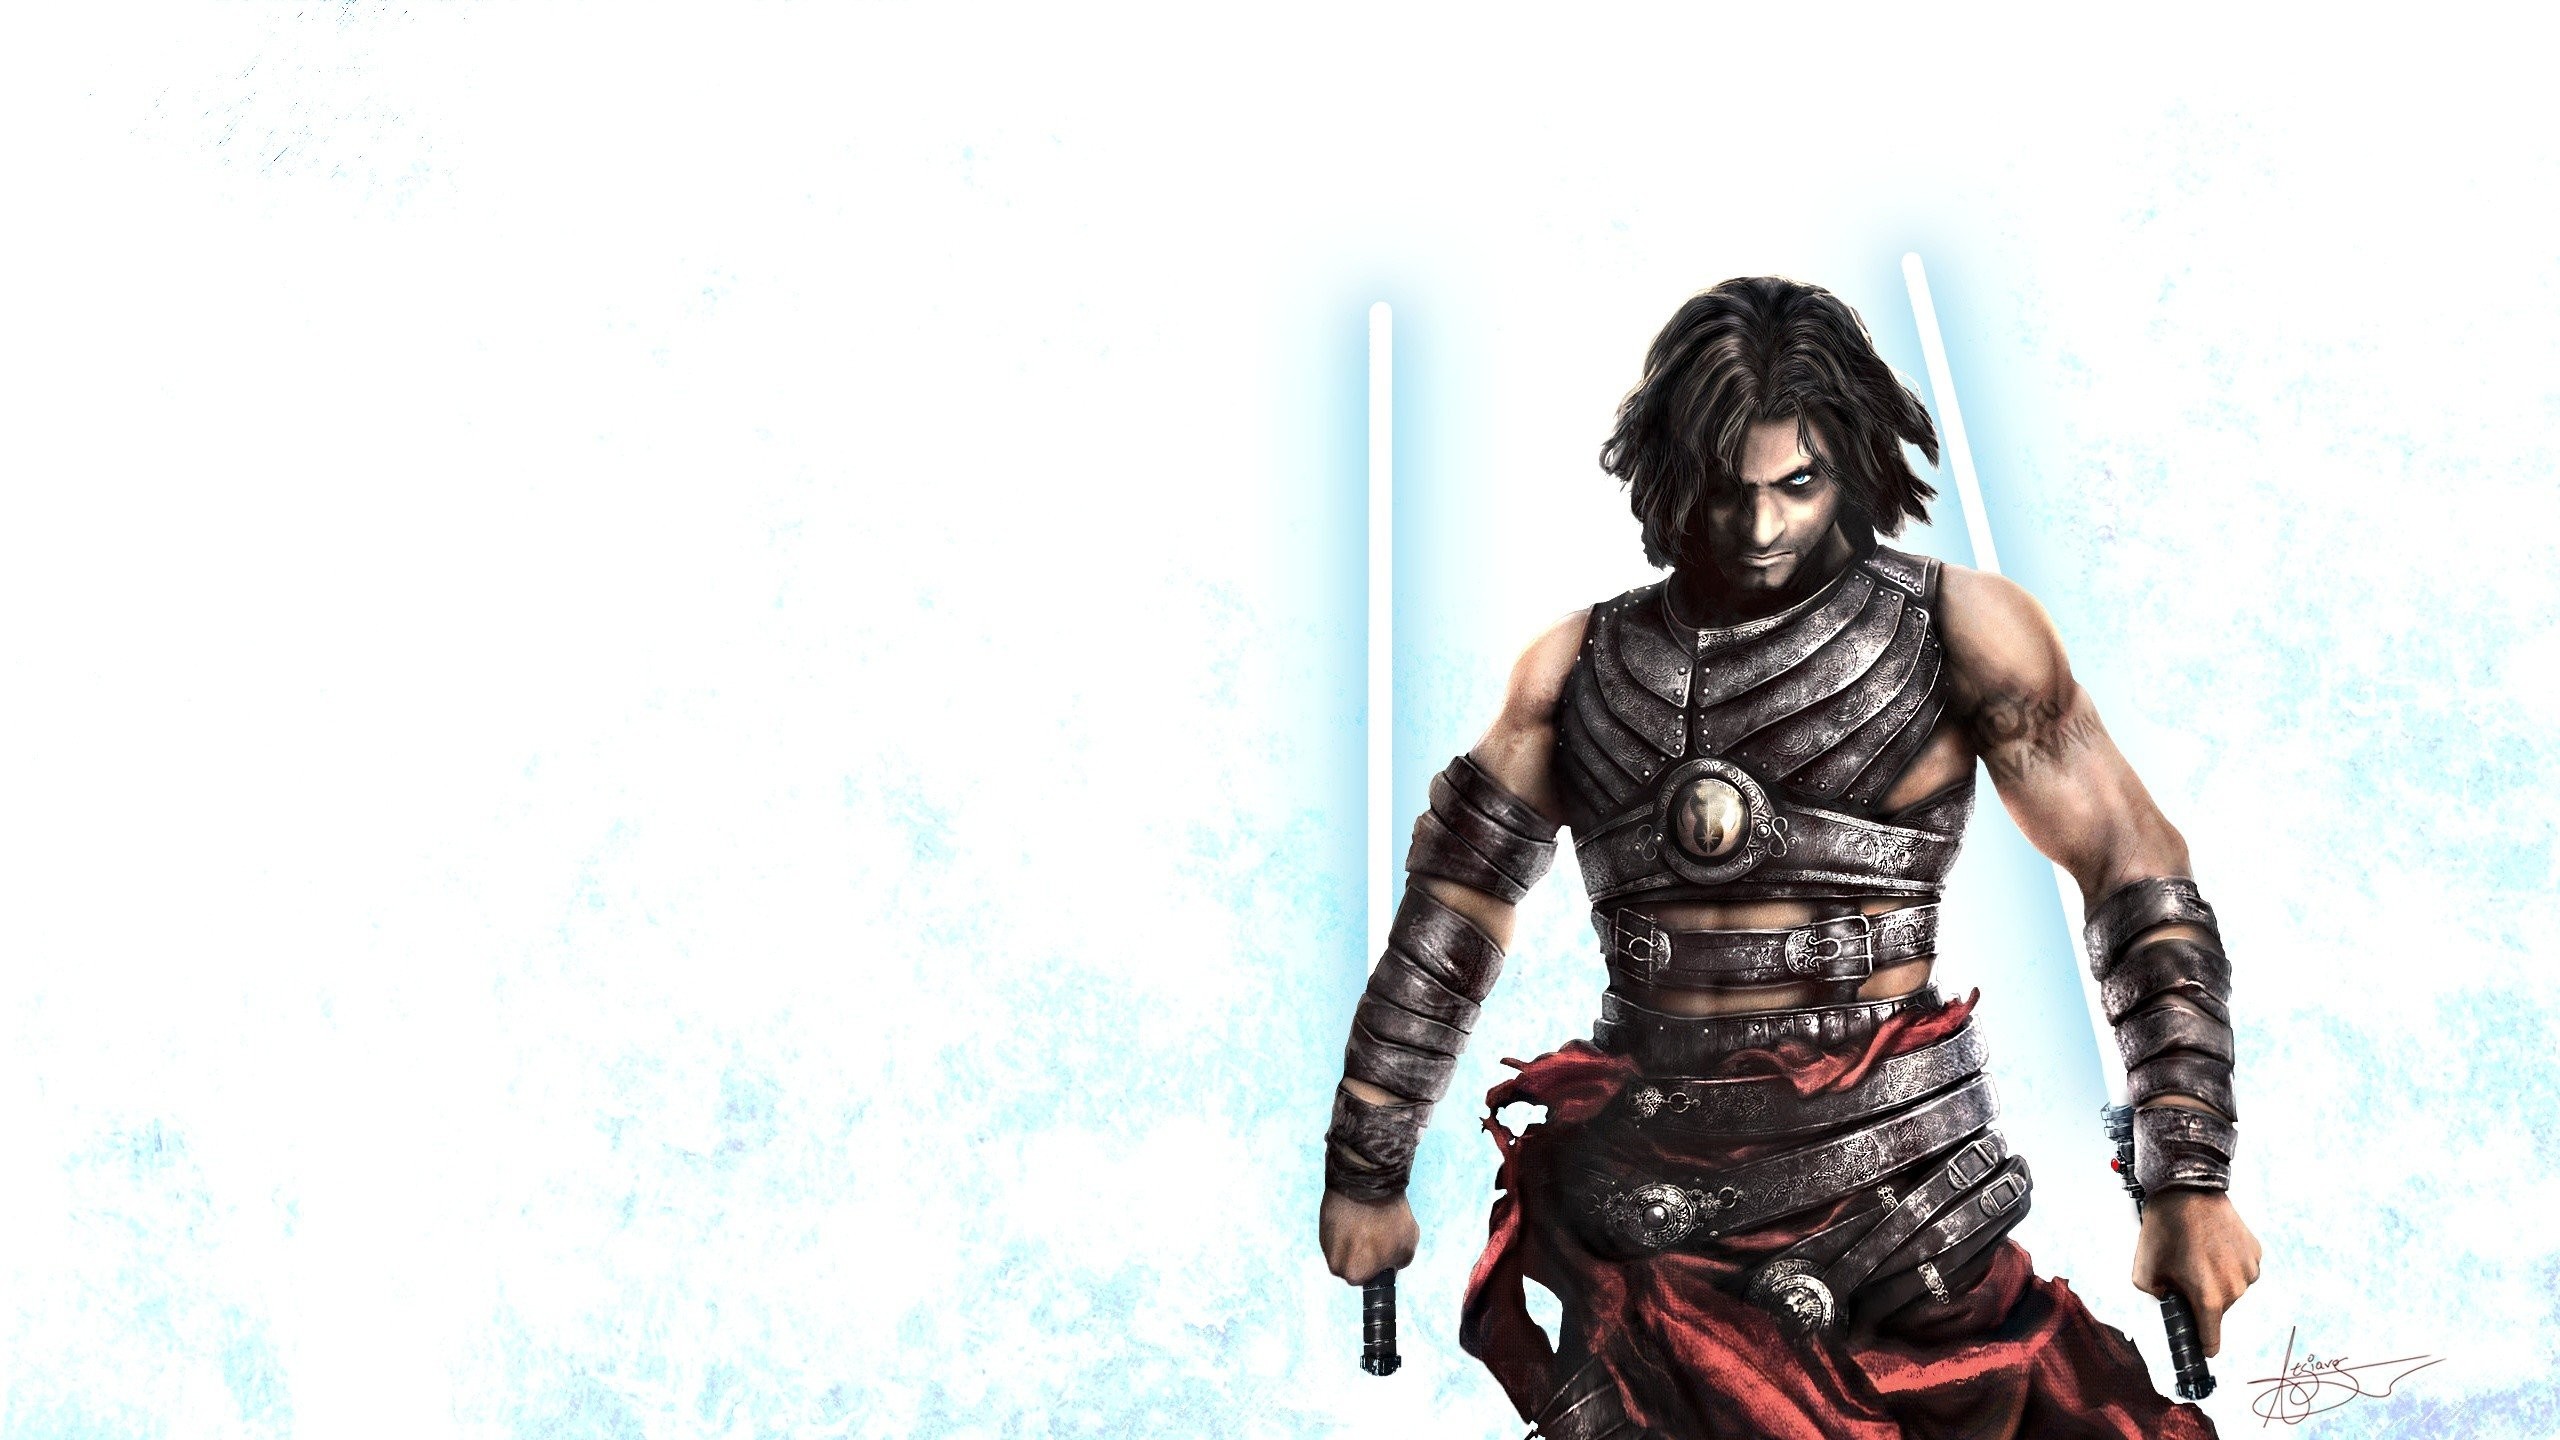 2560x1440 Star Wars video games lightsabers Prince of Persia prince Starkiller simple background  wallpaper |  | 308059 | WallpaperUP